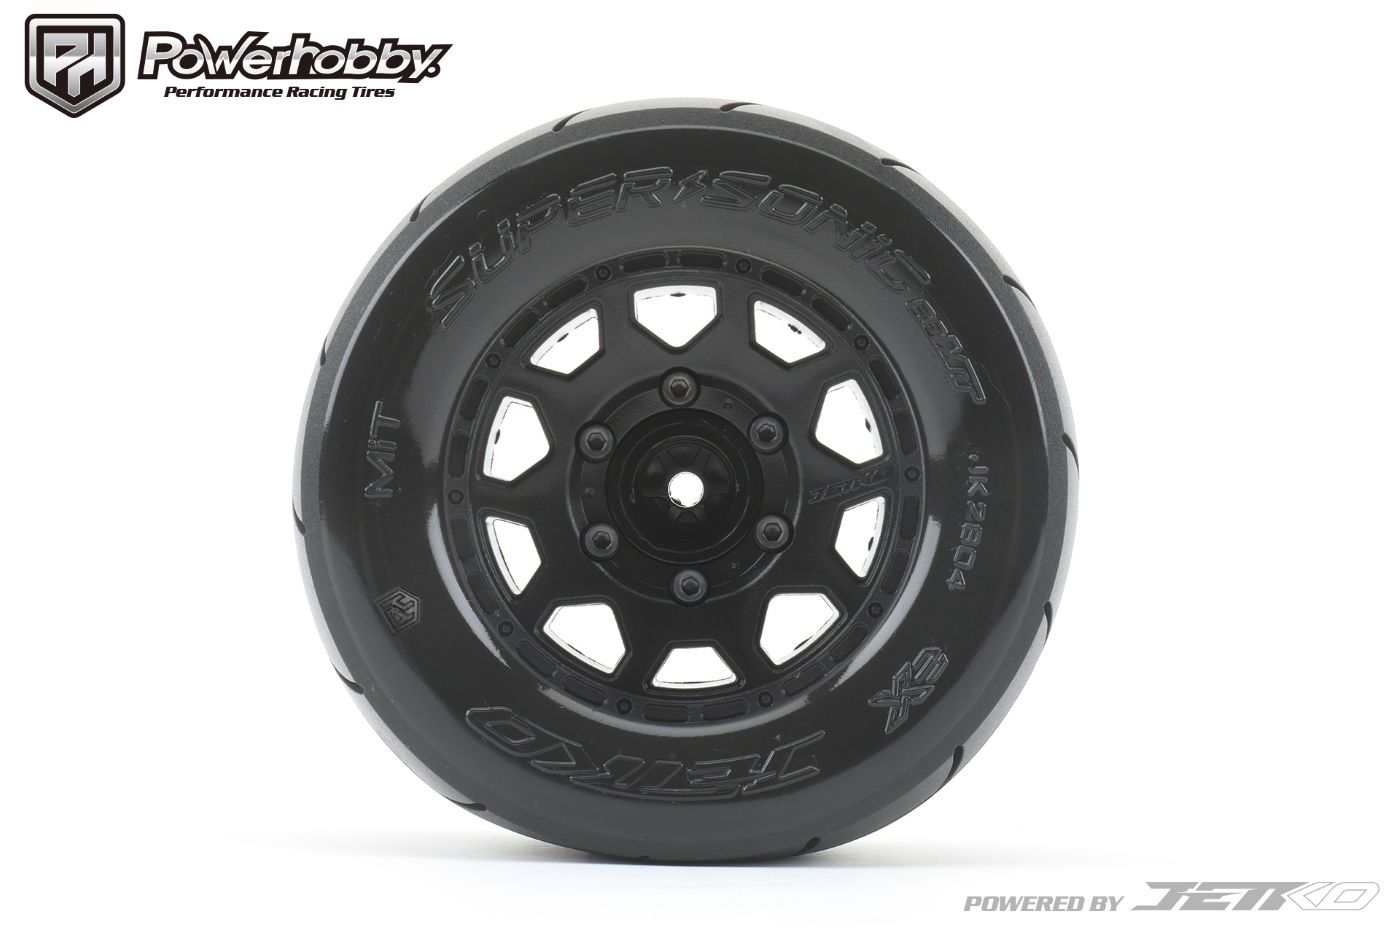 Powerhobby 1/10 2.8 MT Super Sonic Belted Tires (2) with Removable Hex Wheels - PowerHobby